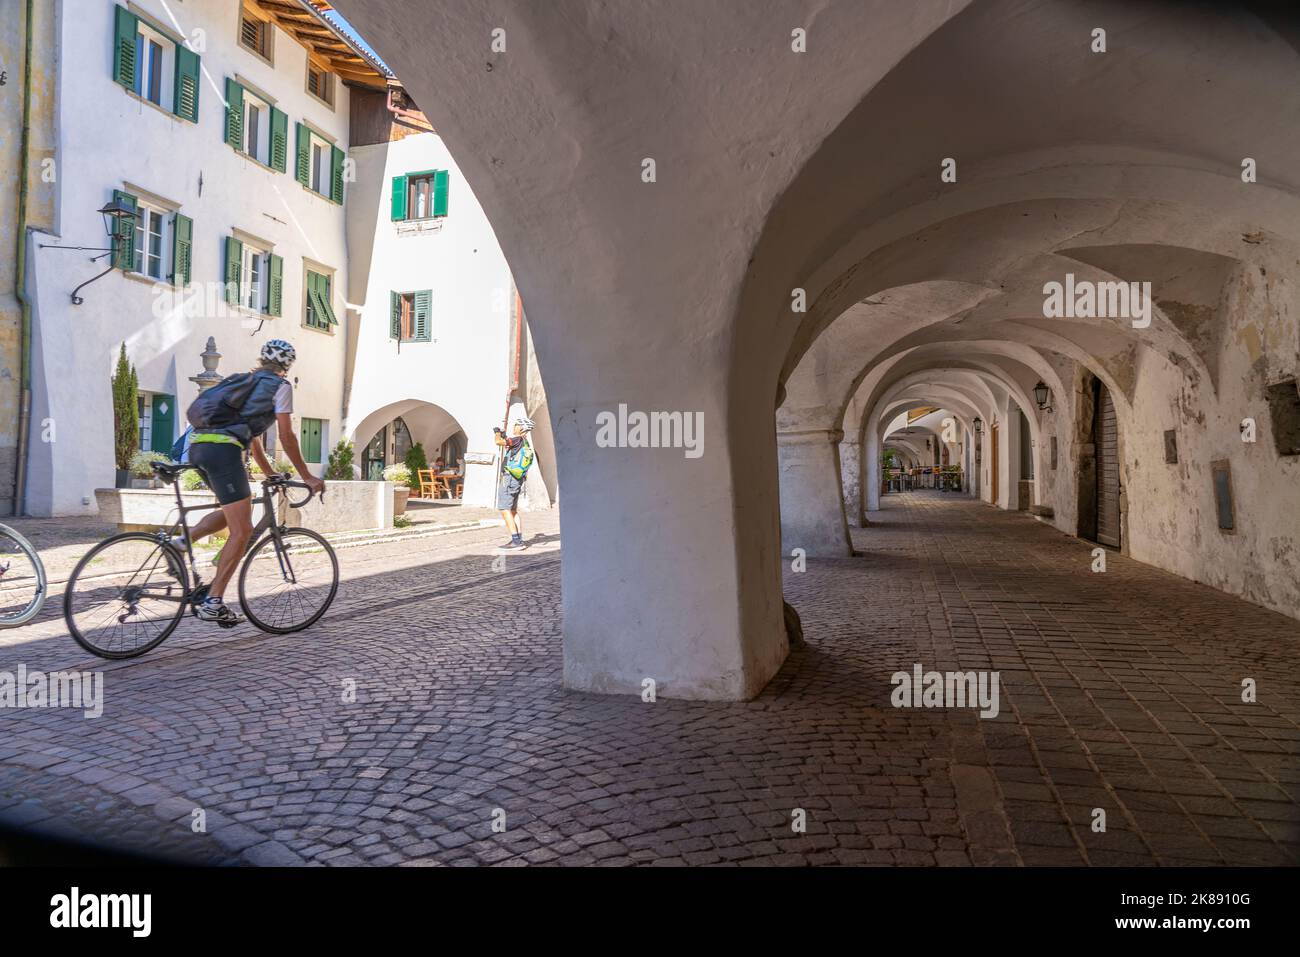 The town of Neumarkt, in the Adige Valley, in South Tyrol, arcades in the old town, in front of shops and restaurants, Italy Stock Photo